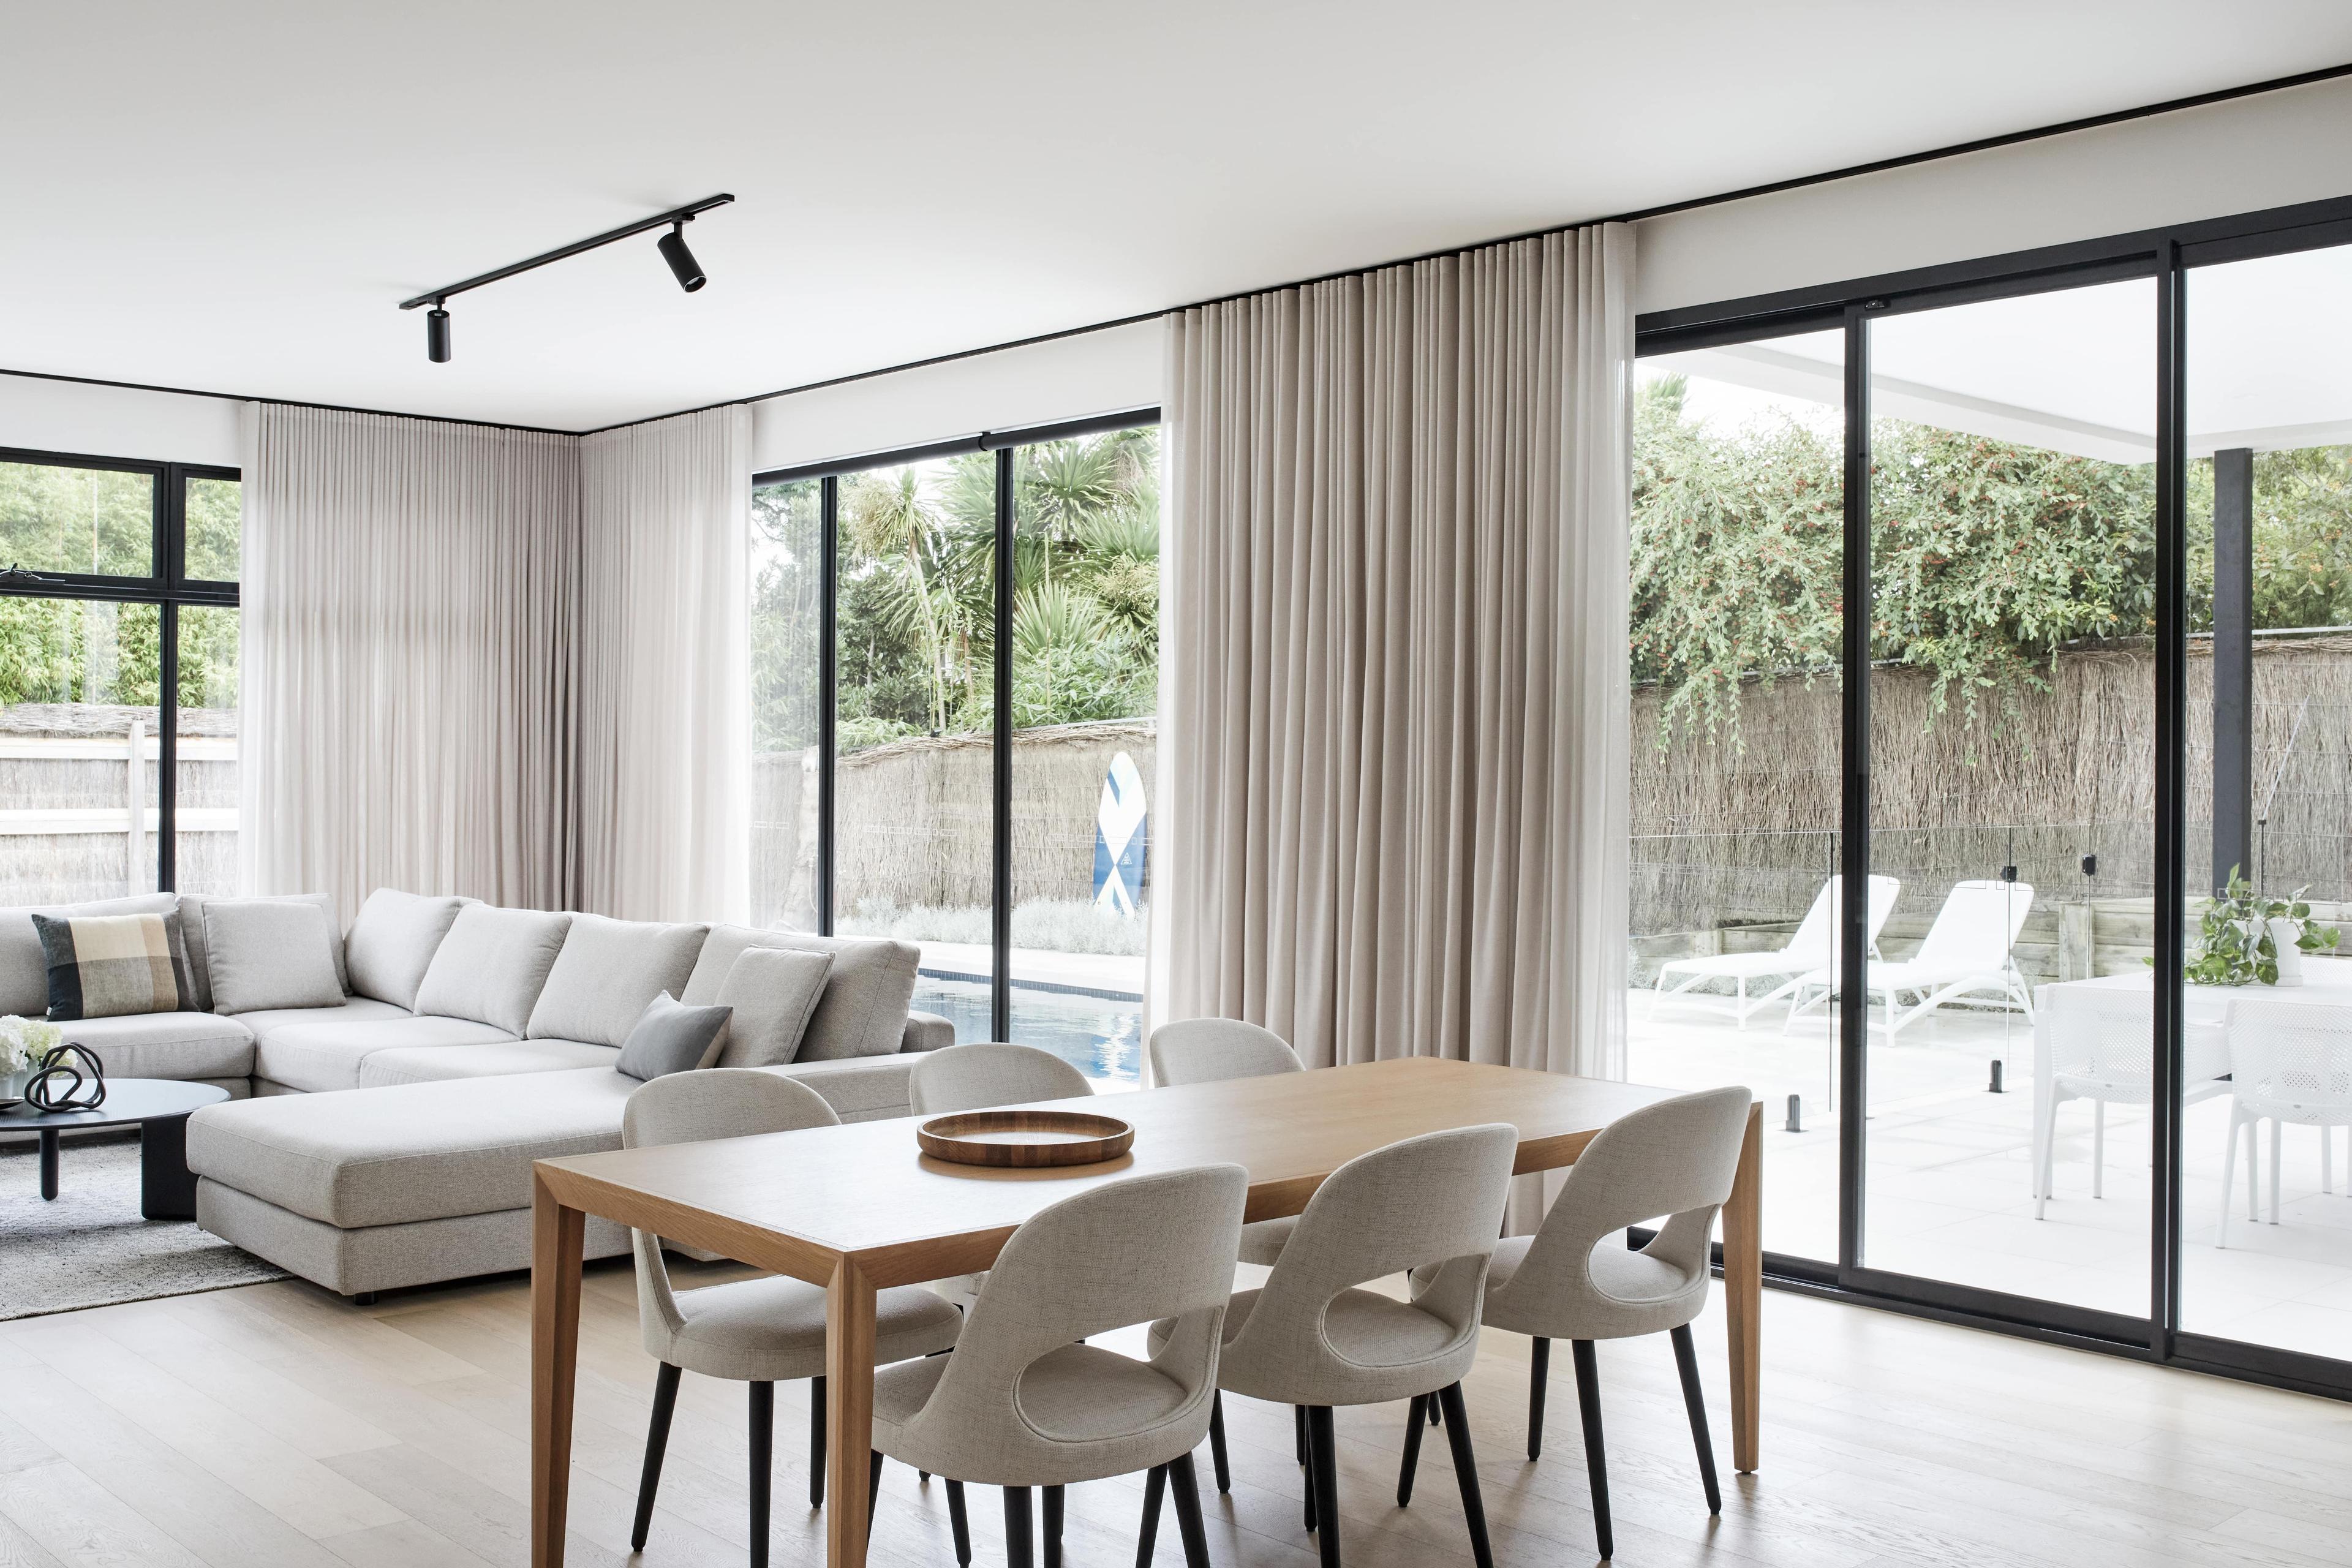 A modern living and dining area of a contemporary home